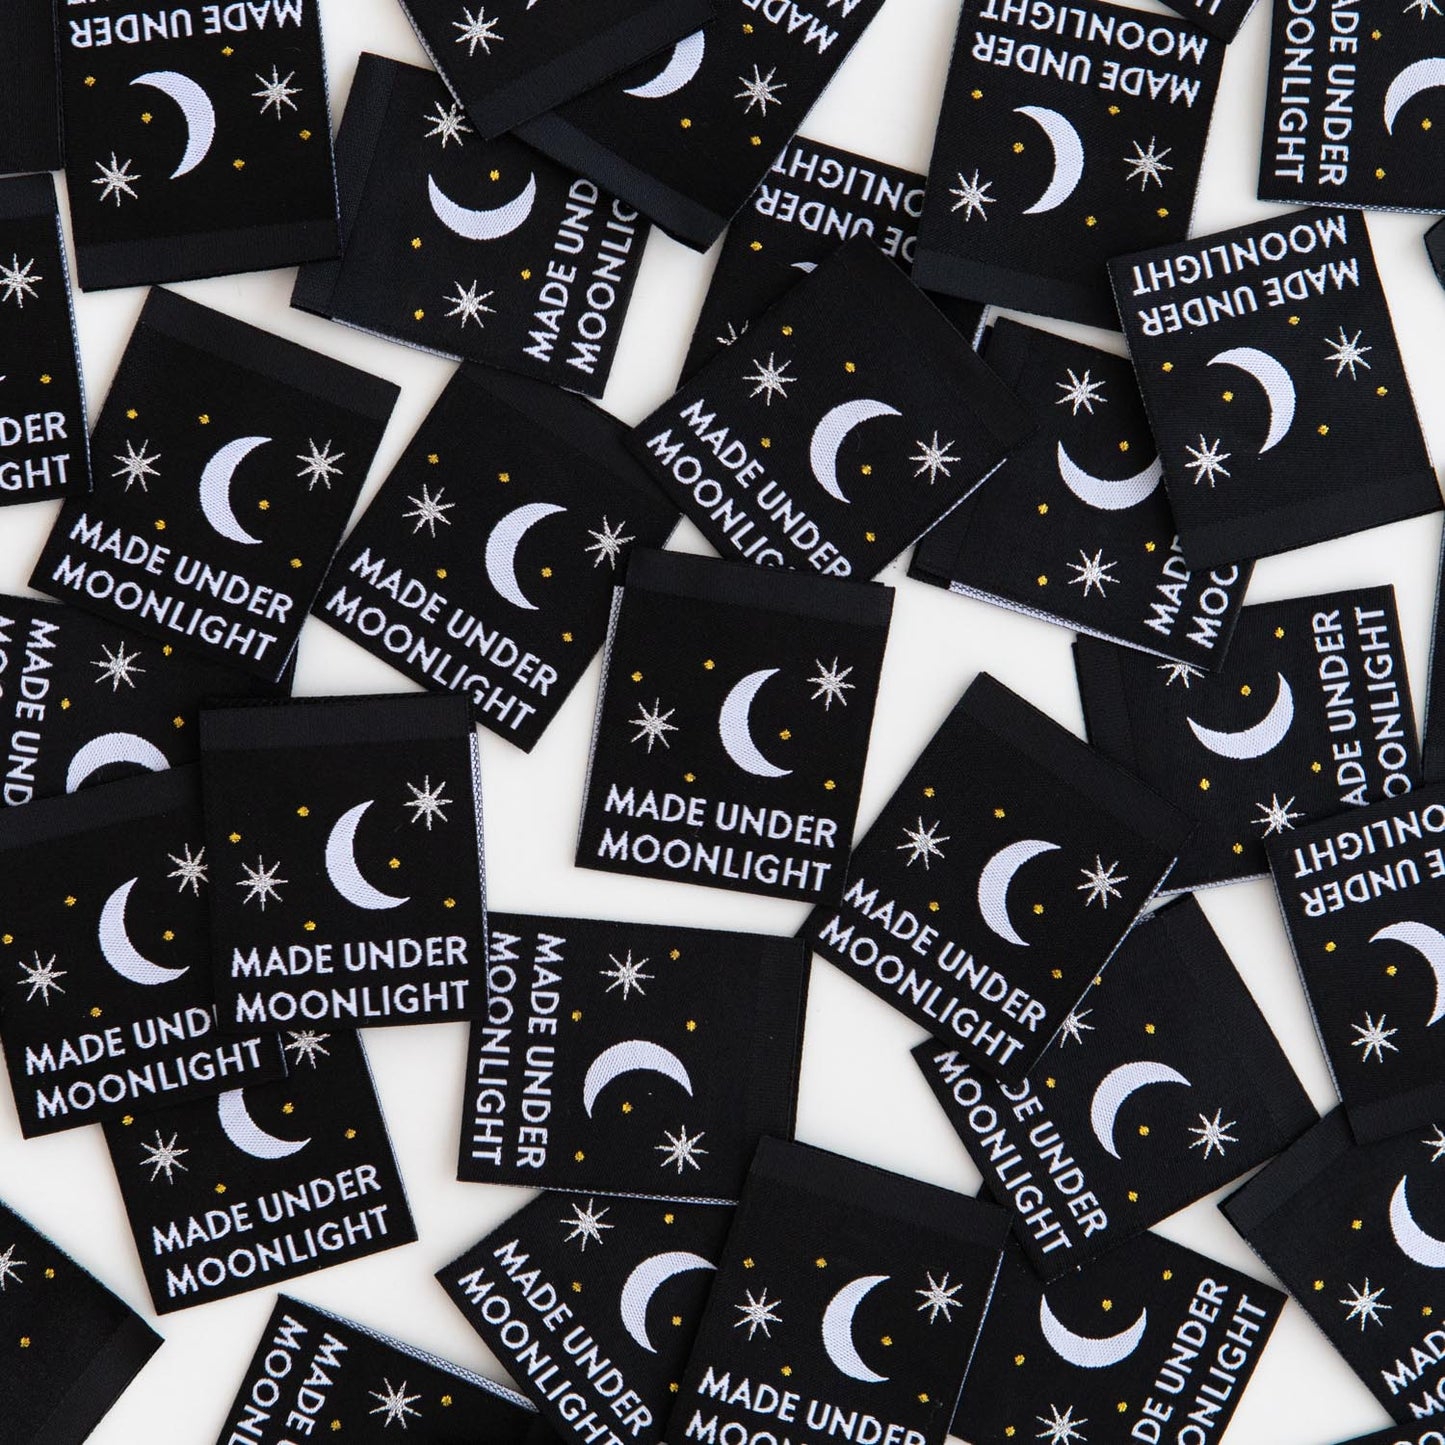 Made Under Moonlight Woven Labels - Sewing Woven Clothing Tags